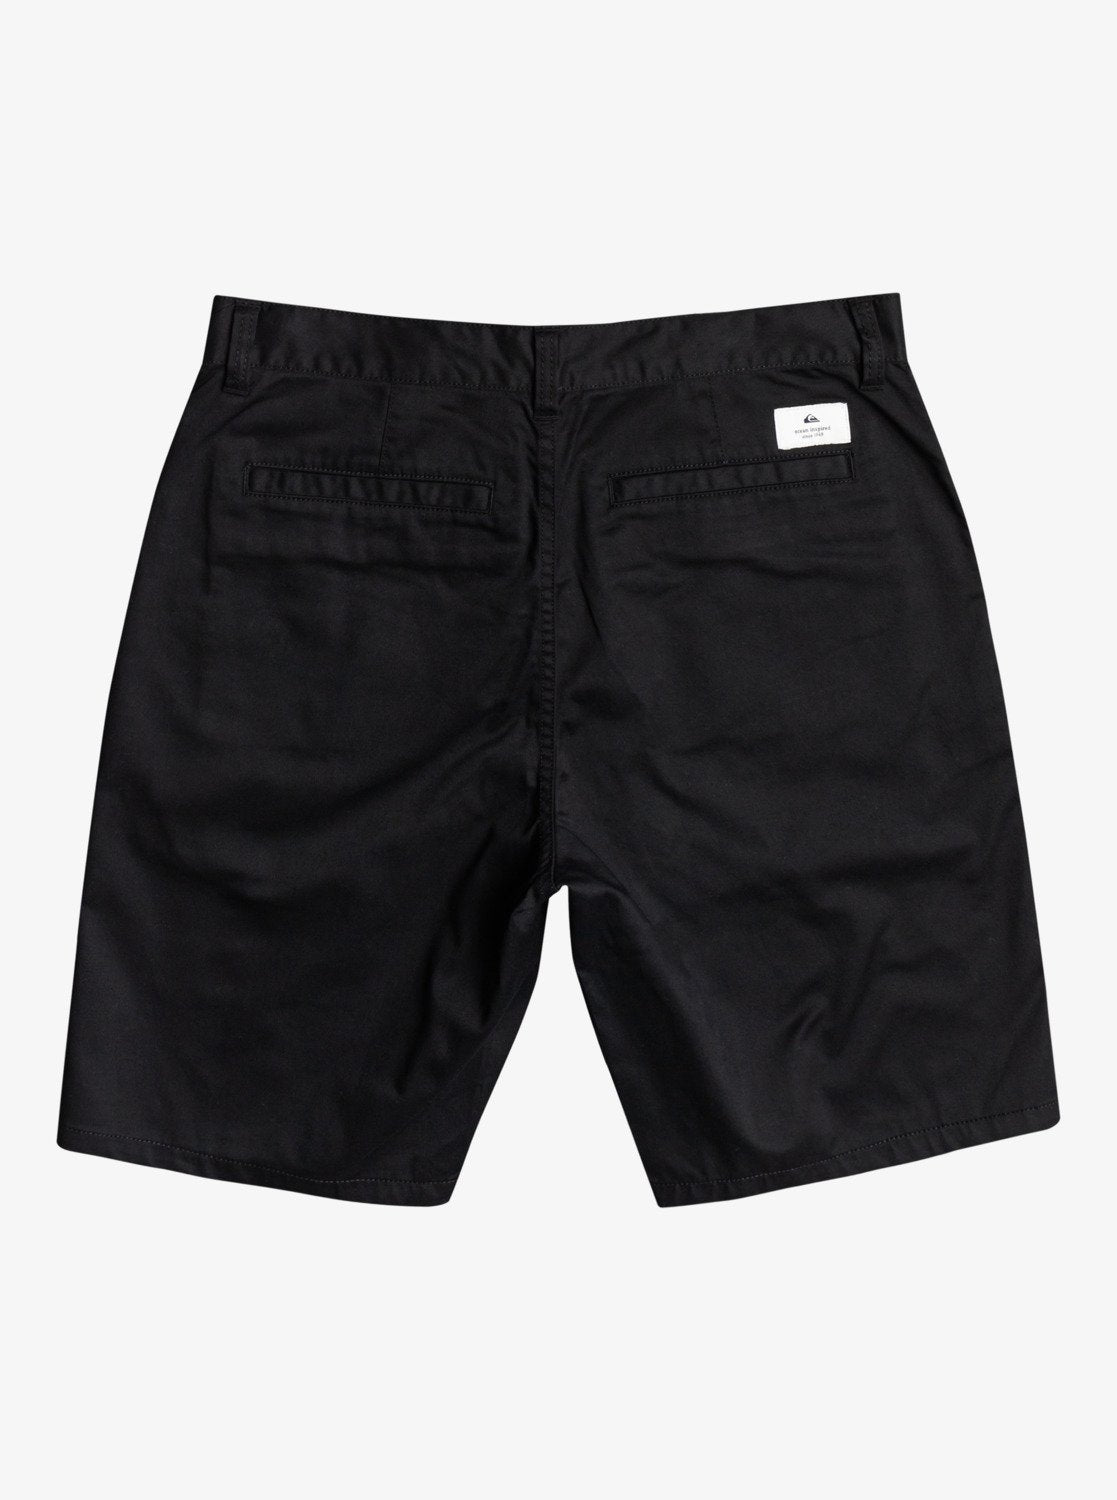 Quiksilver Crest Chino Shorts - Black - 31